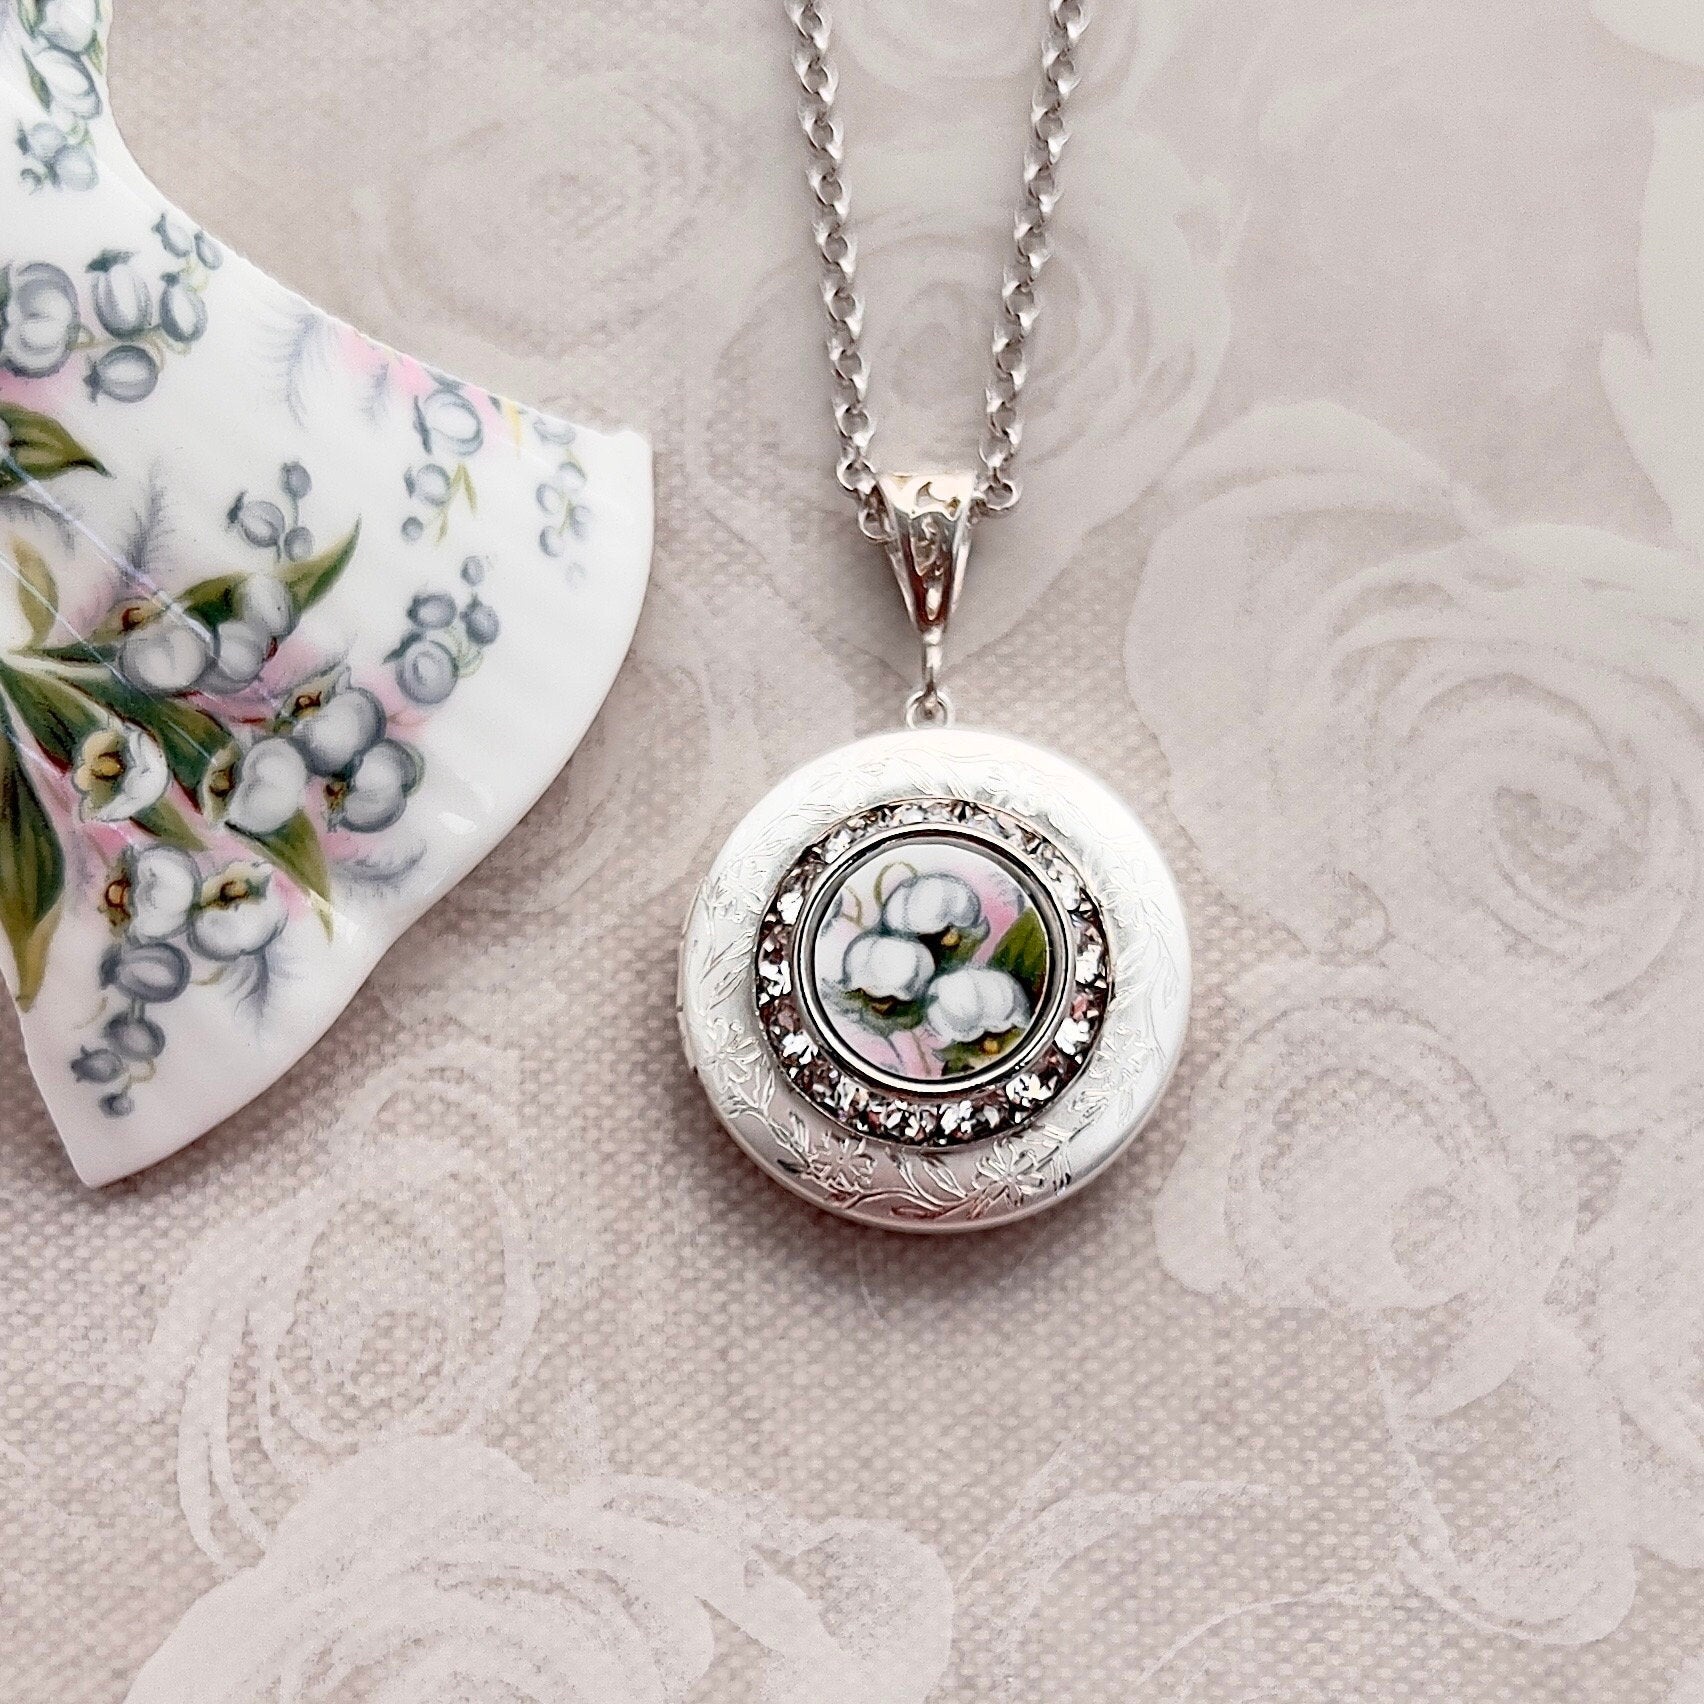 Lily of the Valley Photo Locket Necklace, Broken China Jewelry, Unique Anniversary Gifts for Wife, Vintage China, Gifts for Women